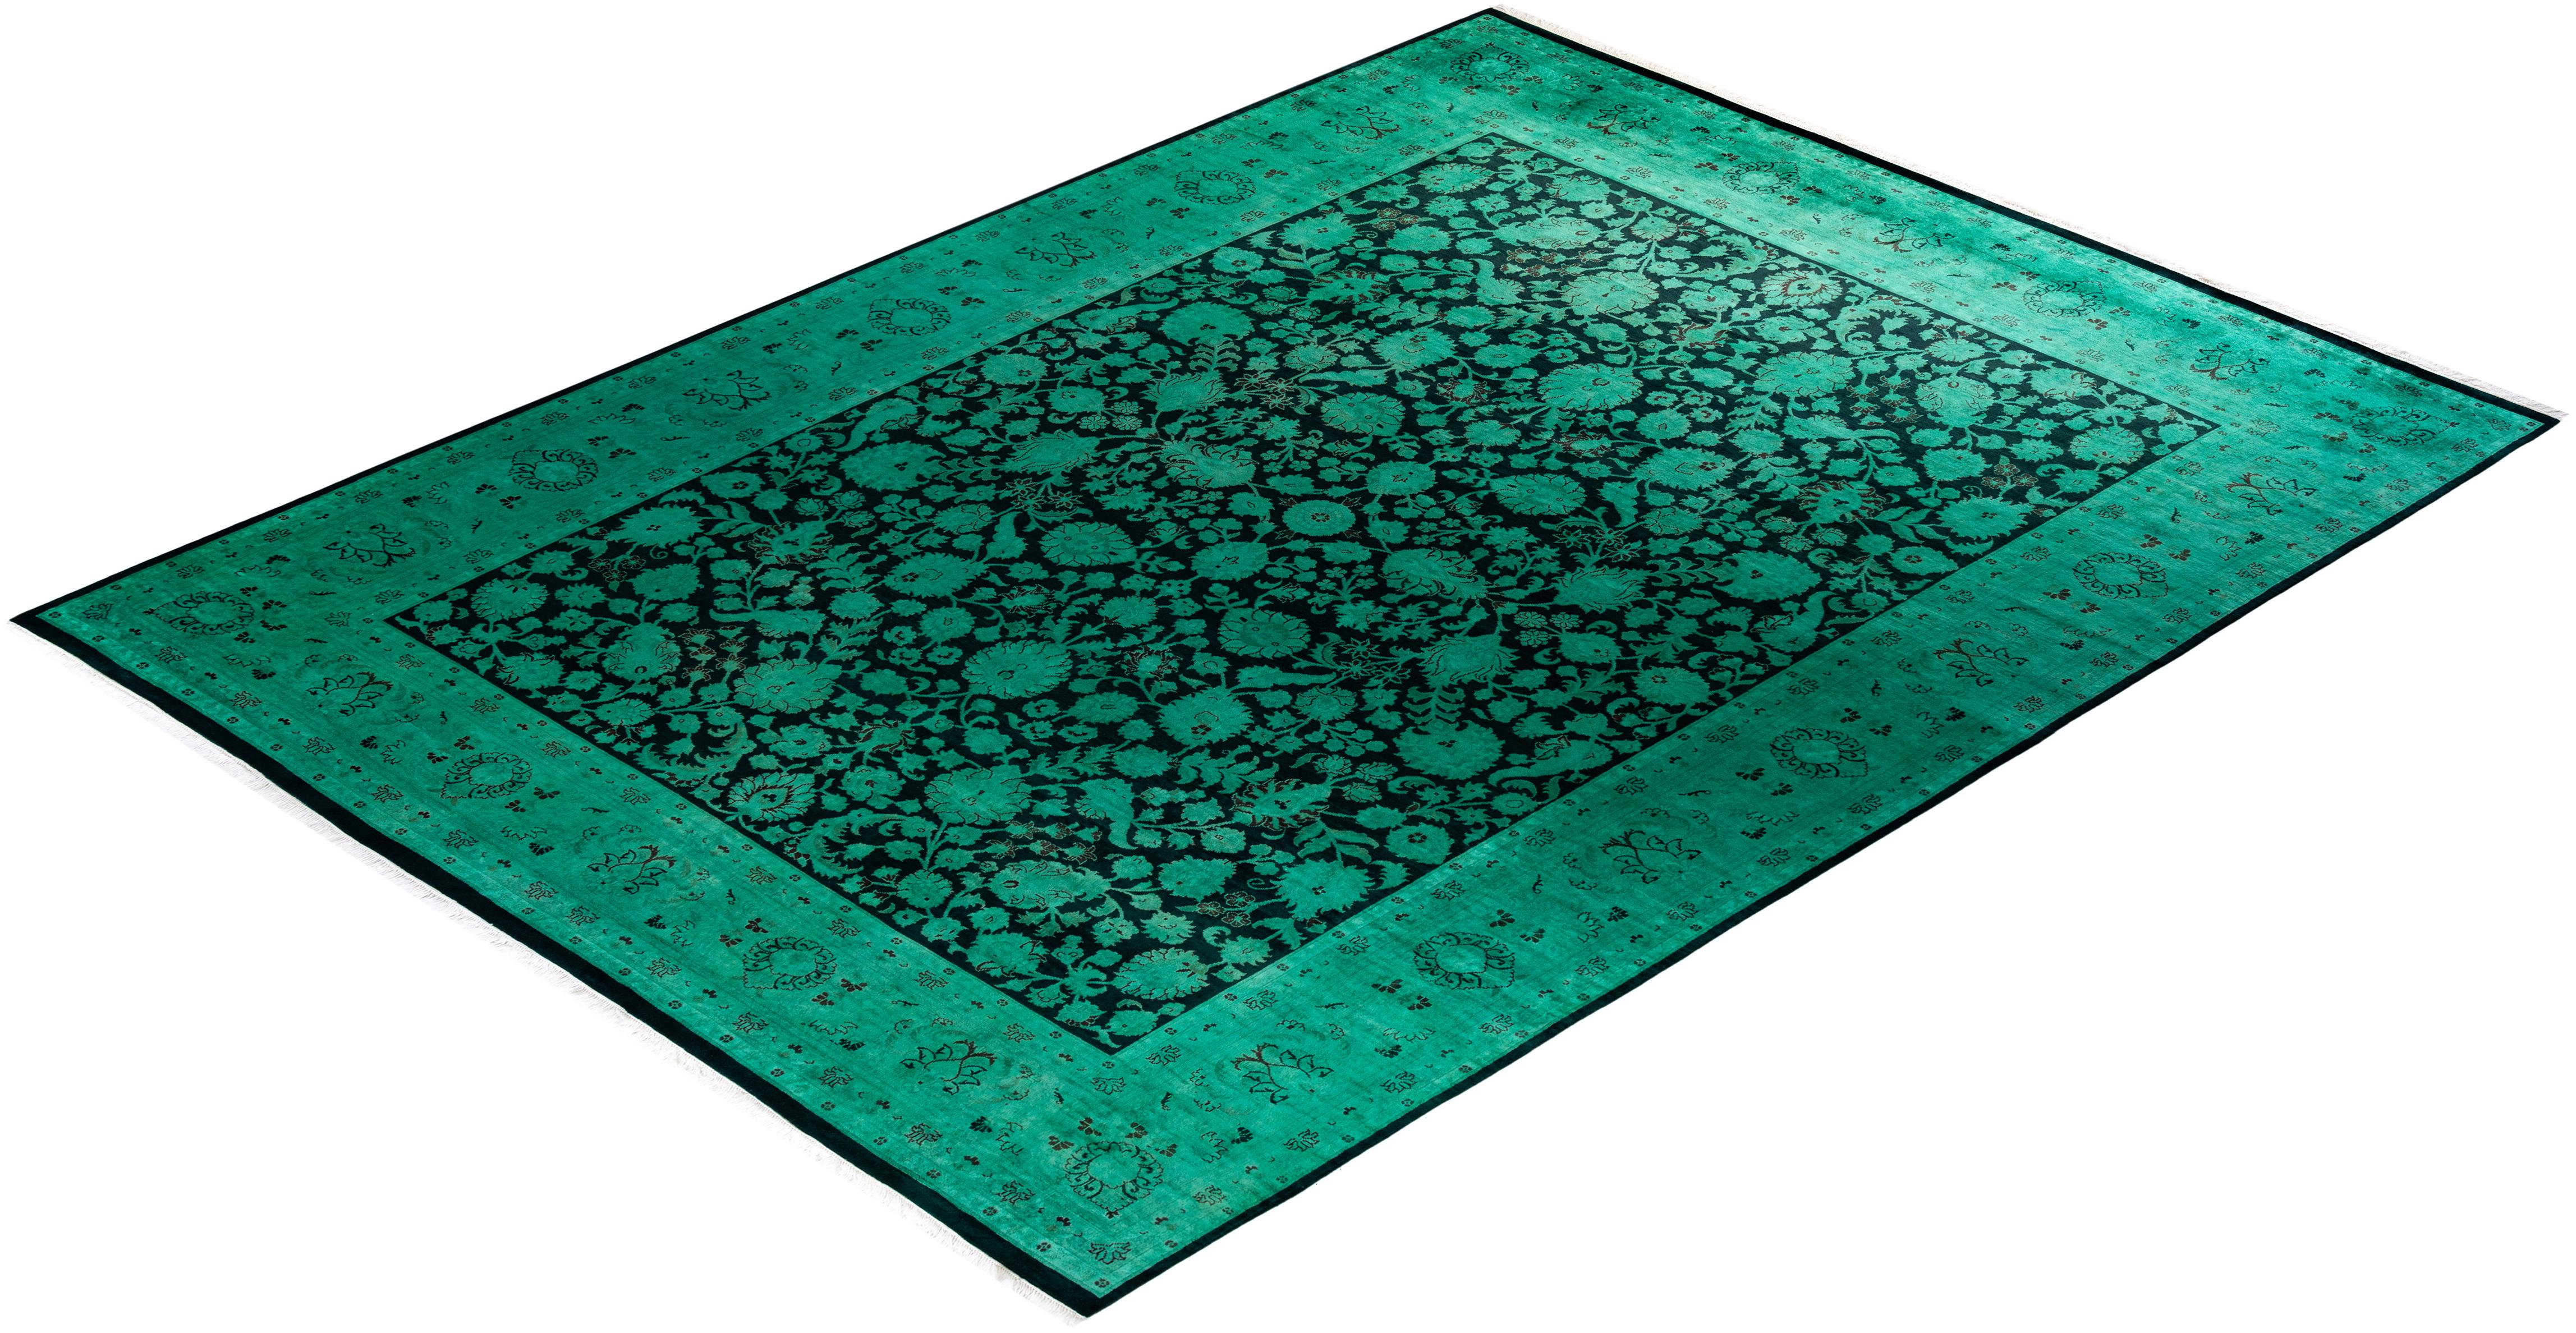 Contemporary Overdyed Handknotted Wool Green Area Rug im Angebot 2